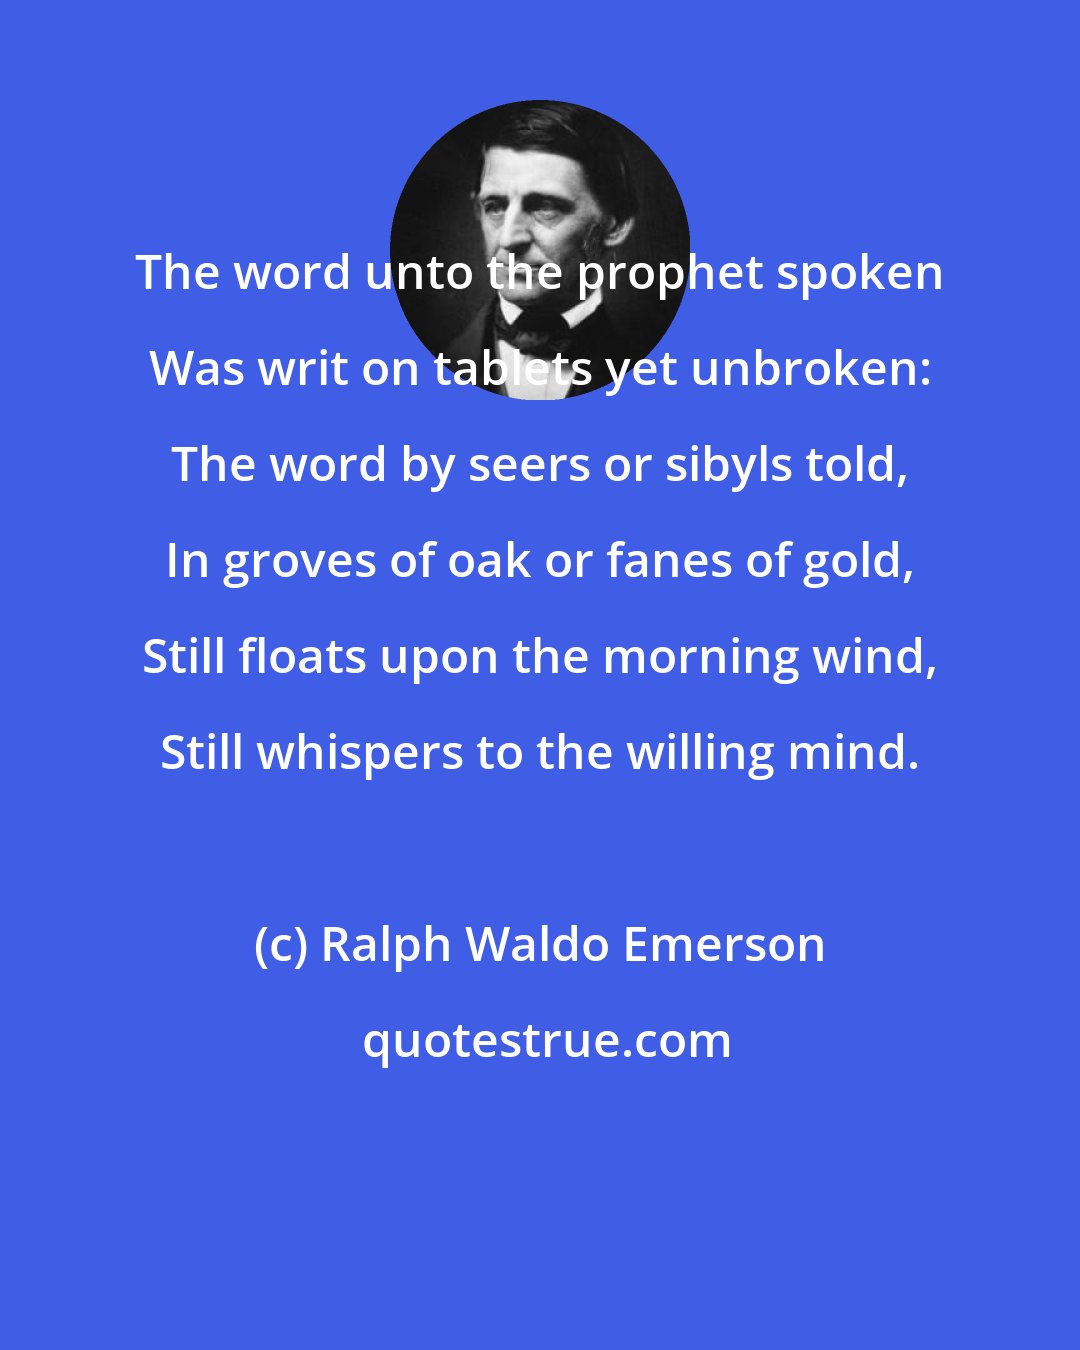 Ralph Waldo Emerson: The word unto the prophet spoken Was writ on tablets yet unbroken: The word by seers or sibyls told, In groves of oak or fanes of gold, Still floats upon the morning wind, Still whispers to the willing mind.